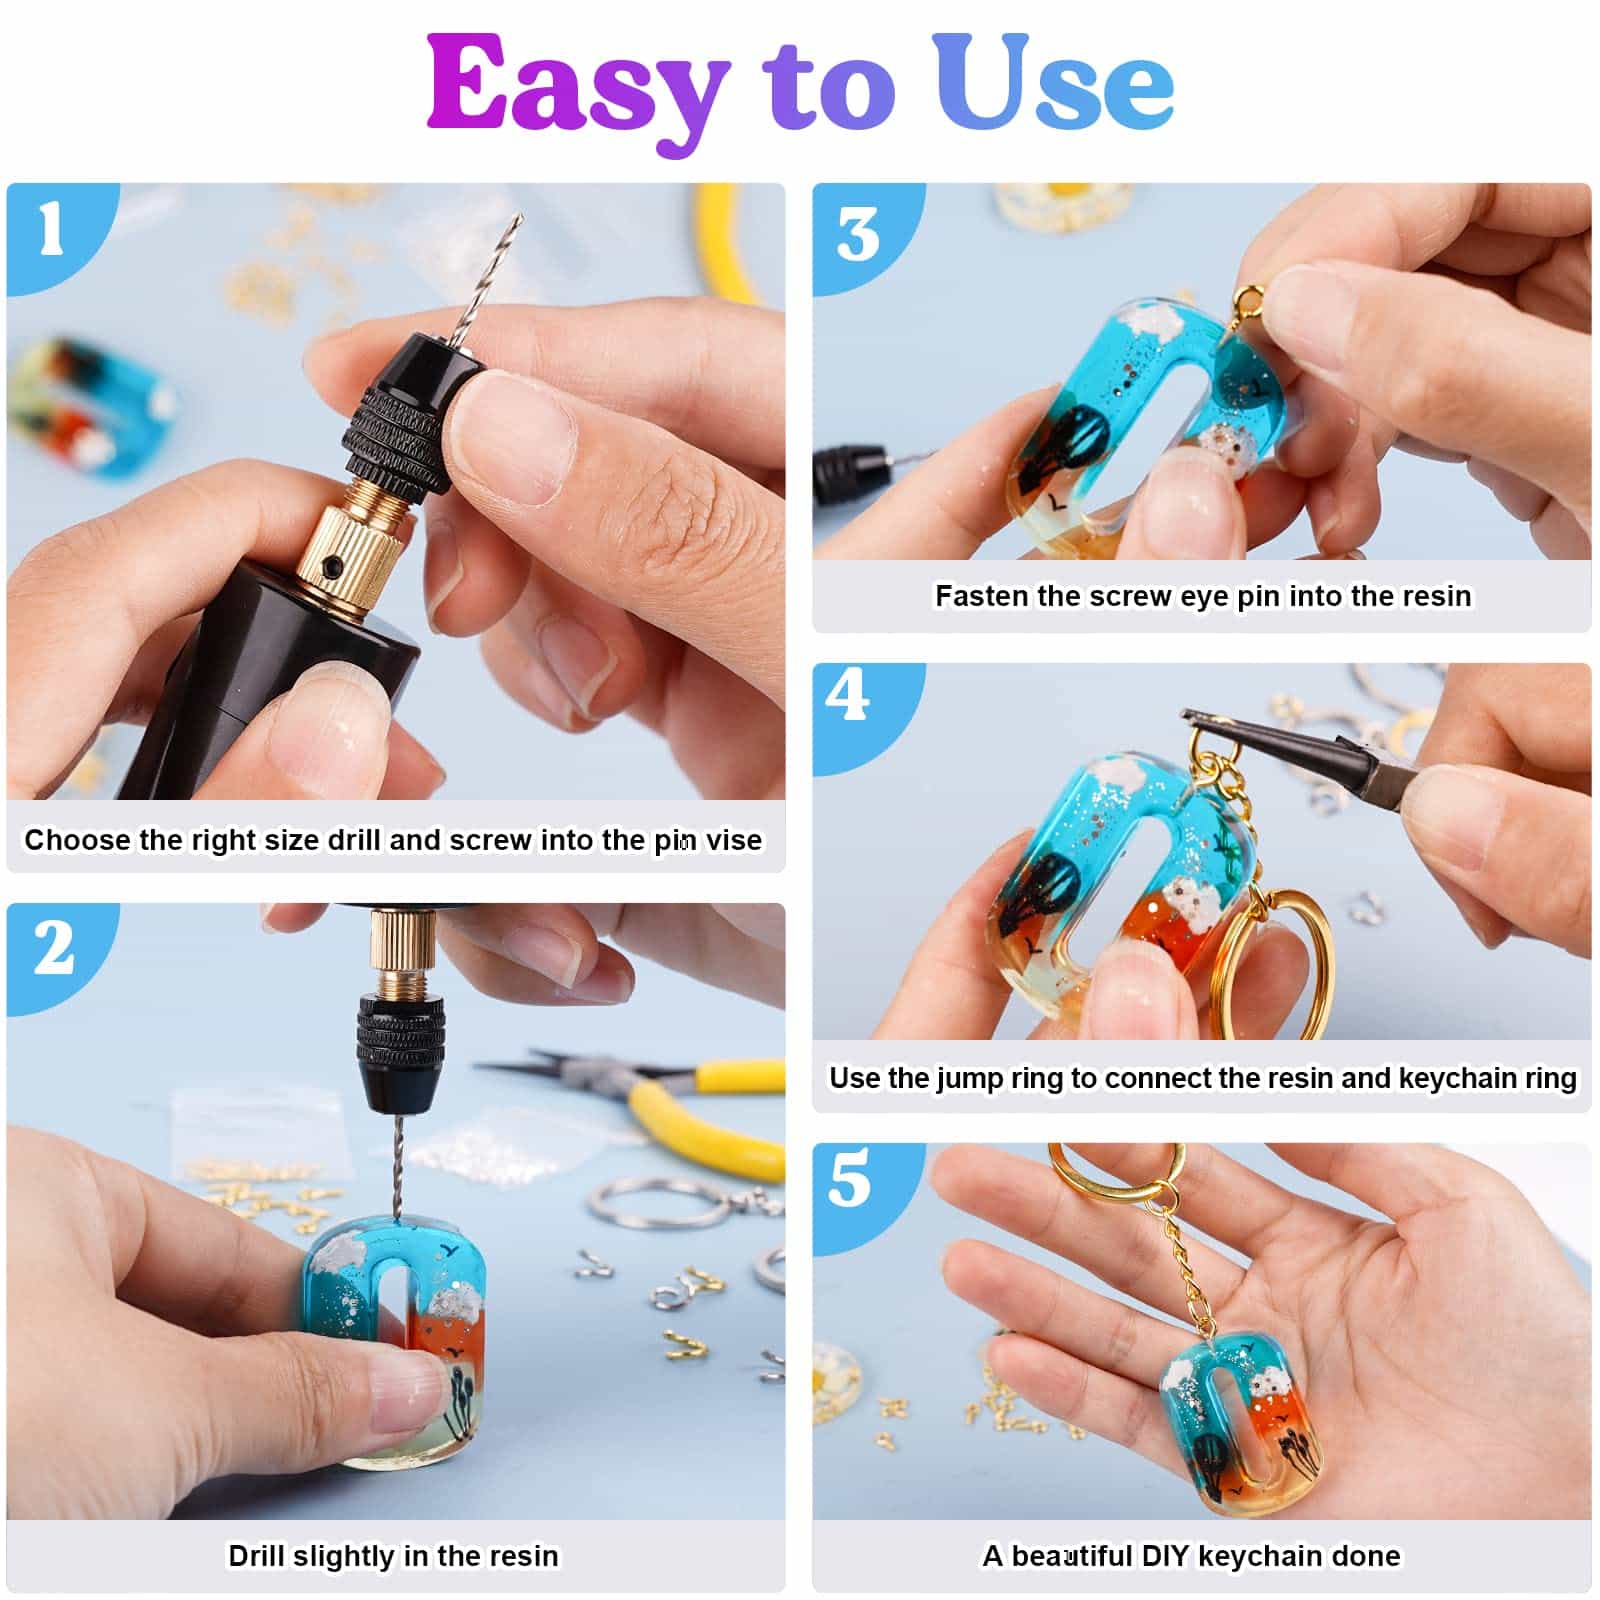 Spring Drill - the easiest drill for resin jewelry – Little